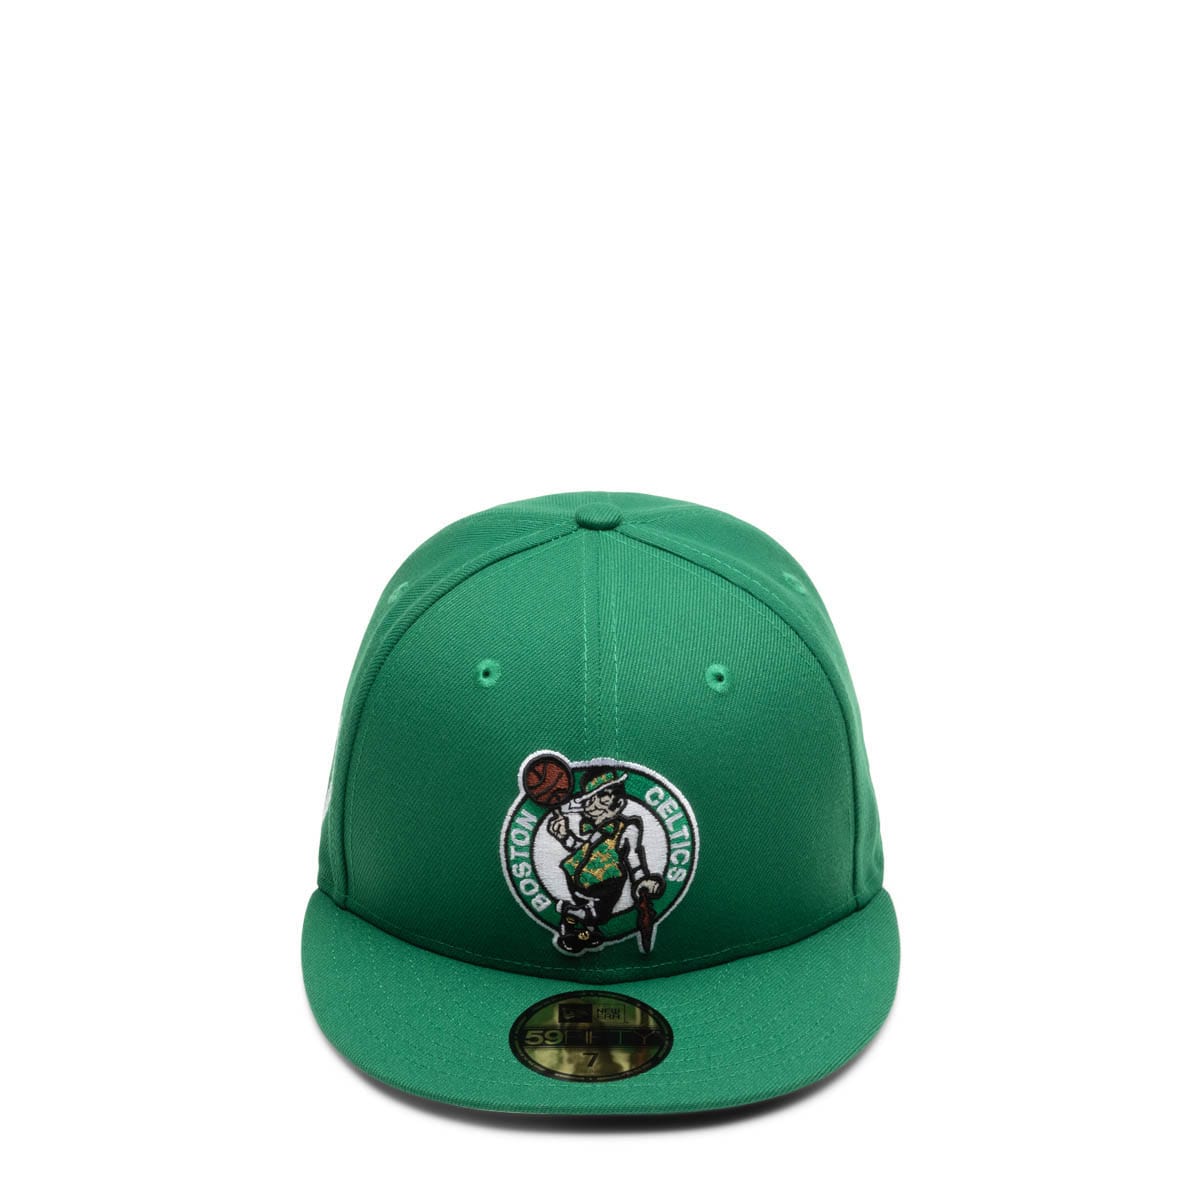 NEW ERA 59FIFTY NBA TIP OFF Boston Celtics fitted HAT SIZE 7- 3/8 NEW